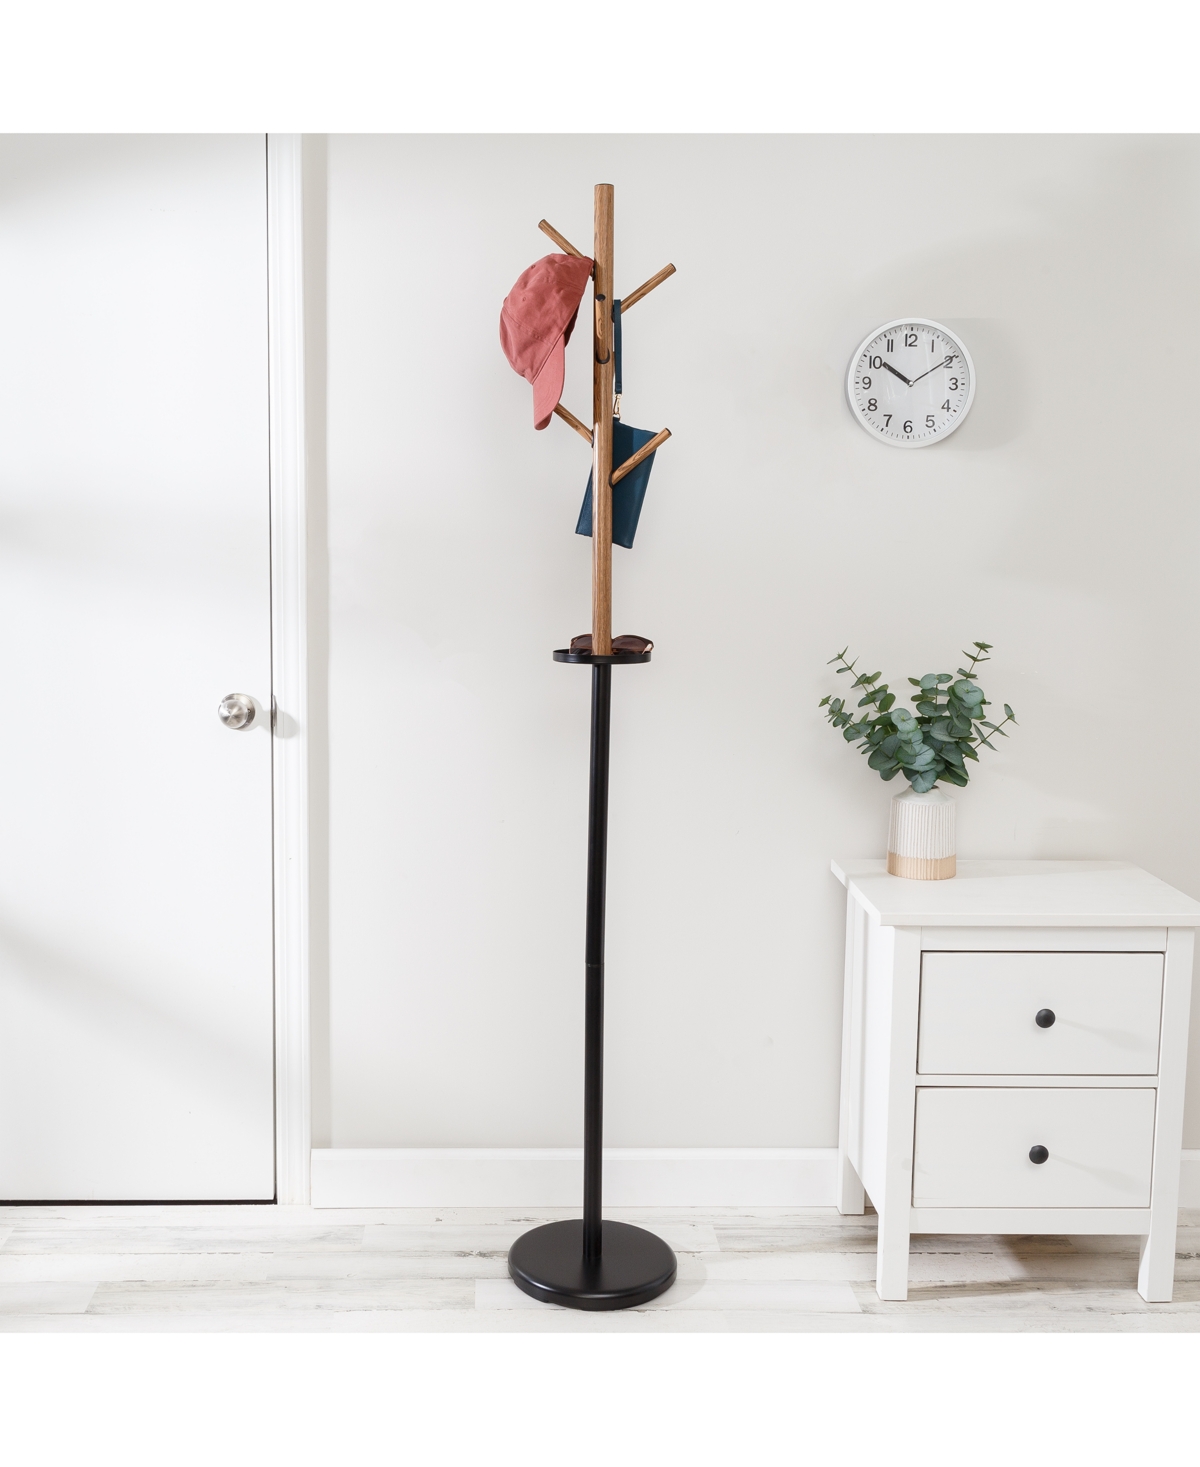 Freestanding Tree Design Coat Rack with Accessory Tray - Black